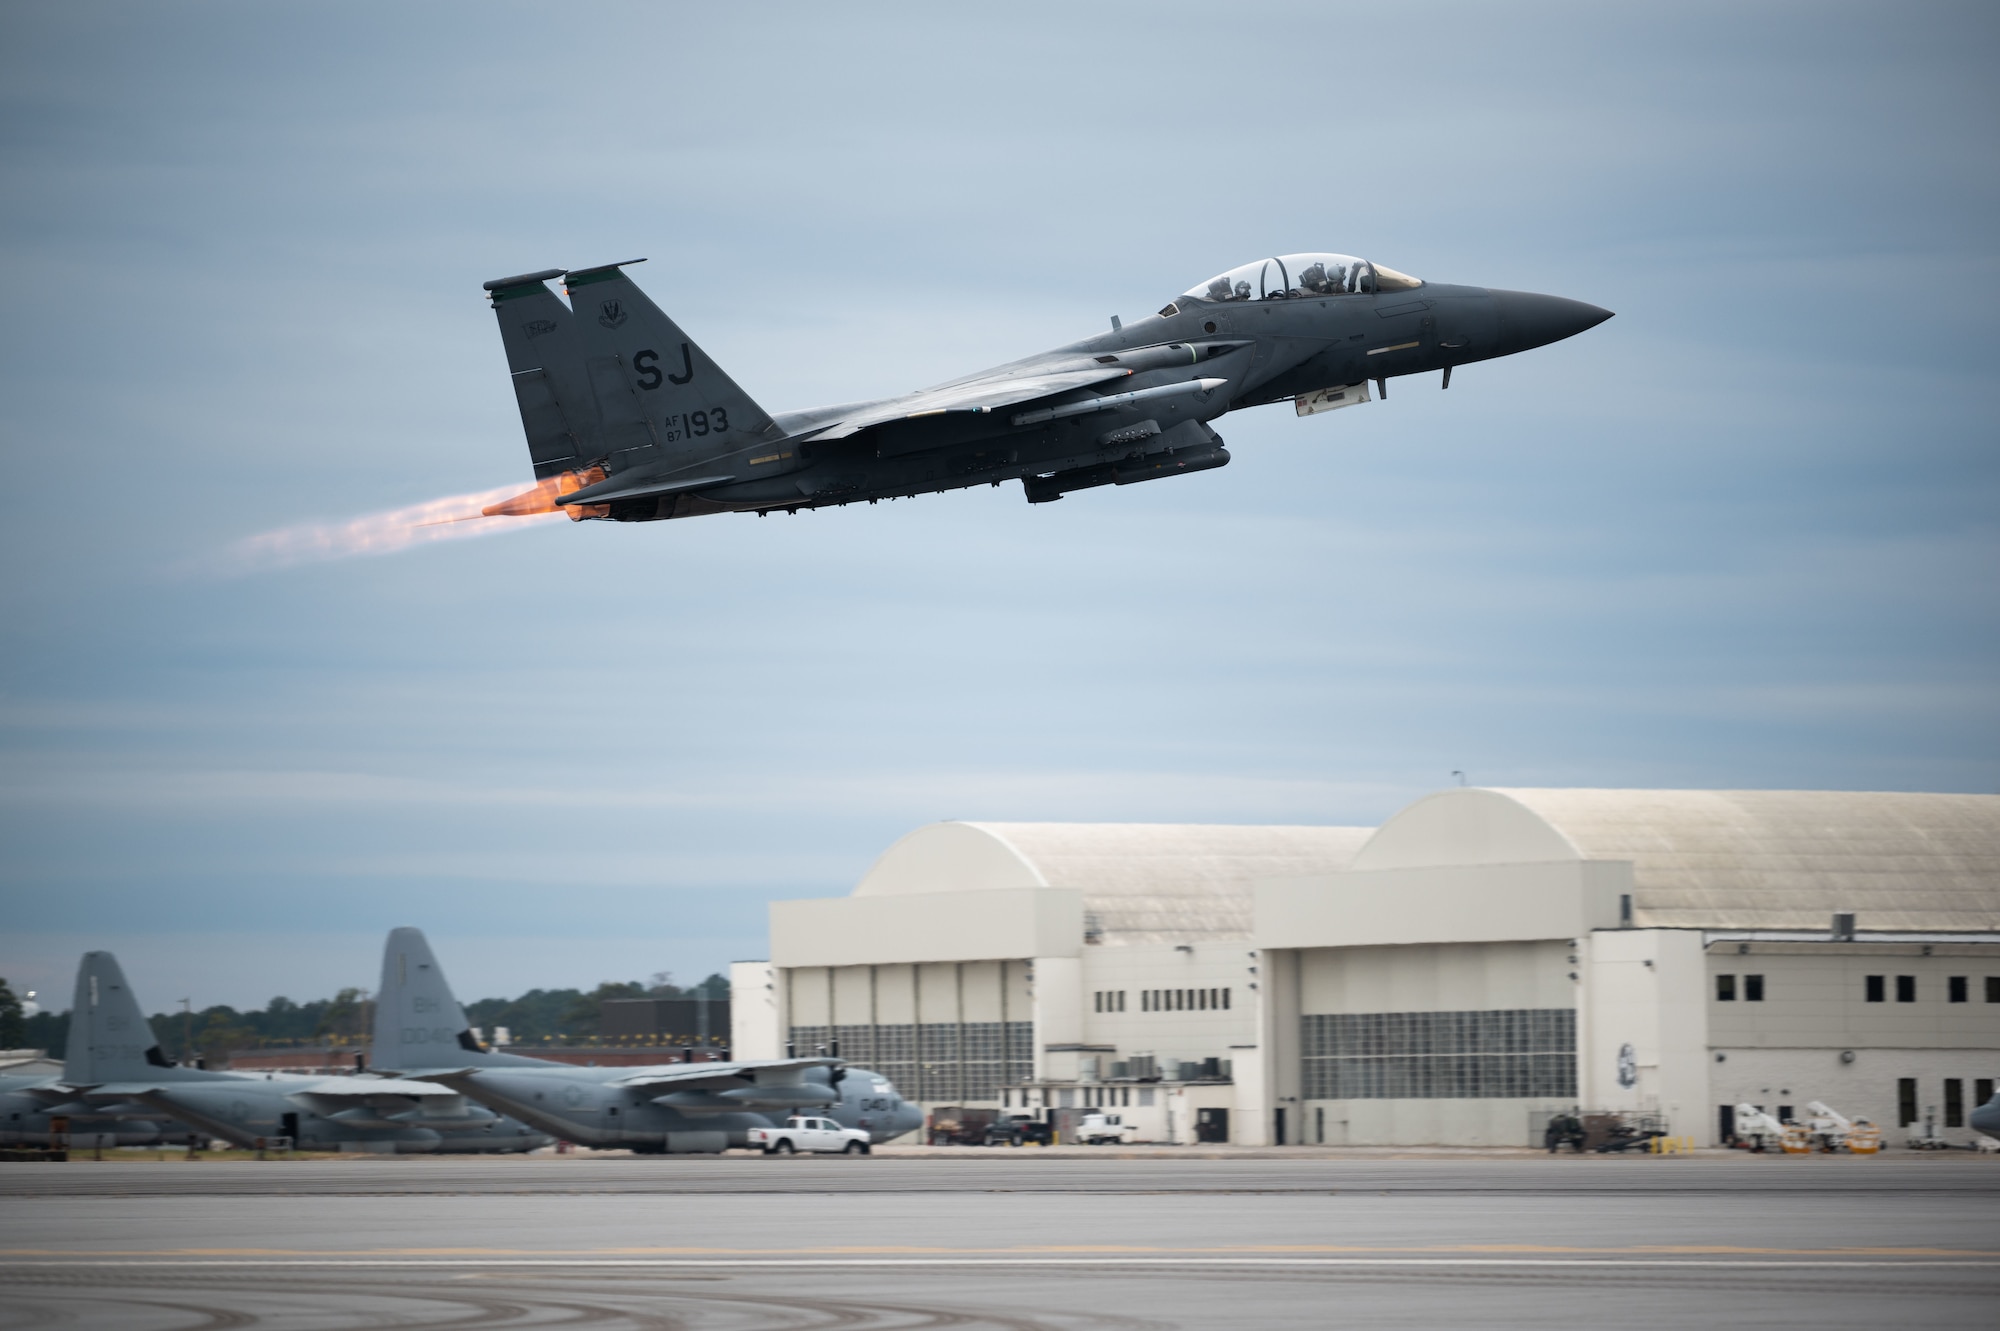 An F-15E Strike Eagle takes off from Marine Corps Air Station Cherry Point, North Carolina, Dec. 14, 2022. The aircraft uses two flying crew members; a pilot and a weapon systems officer. (U.S. Air Force photo by Airman 1st Class Rebecca Sirimarco-Lang)